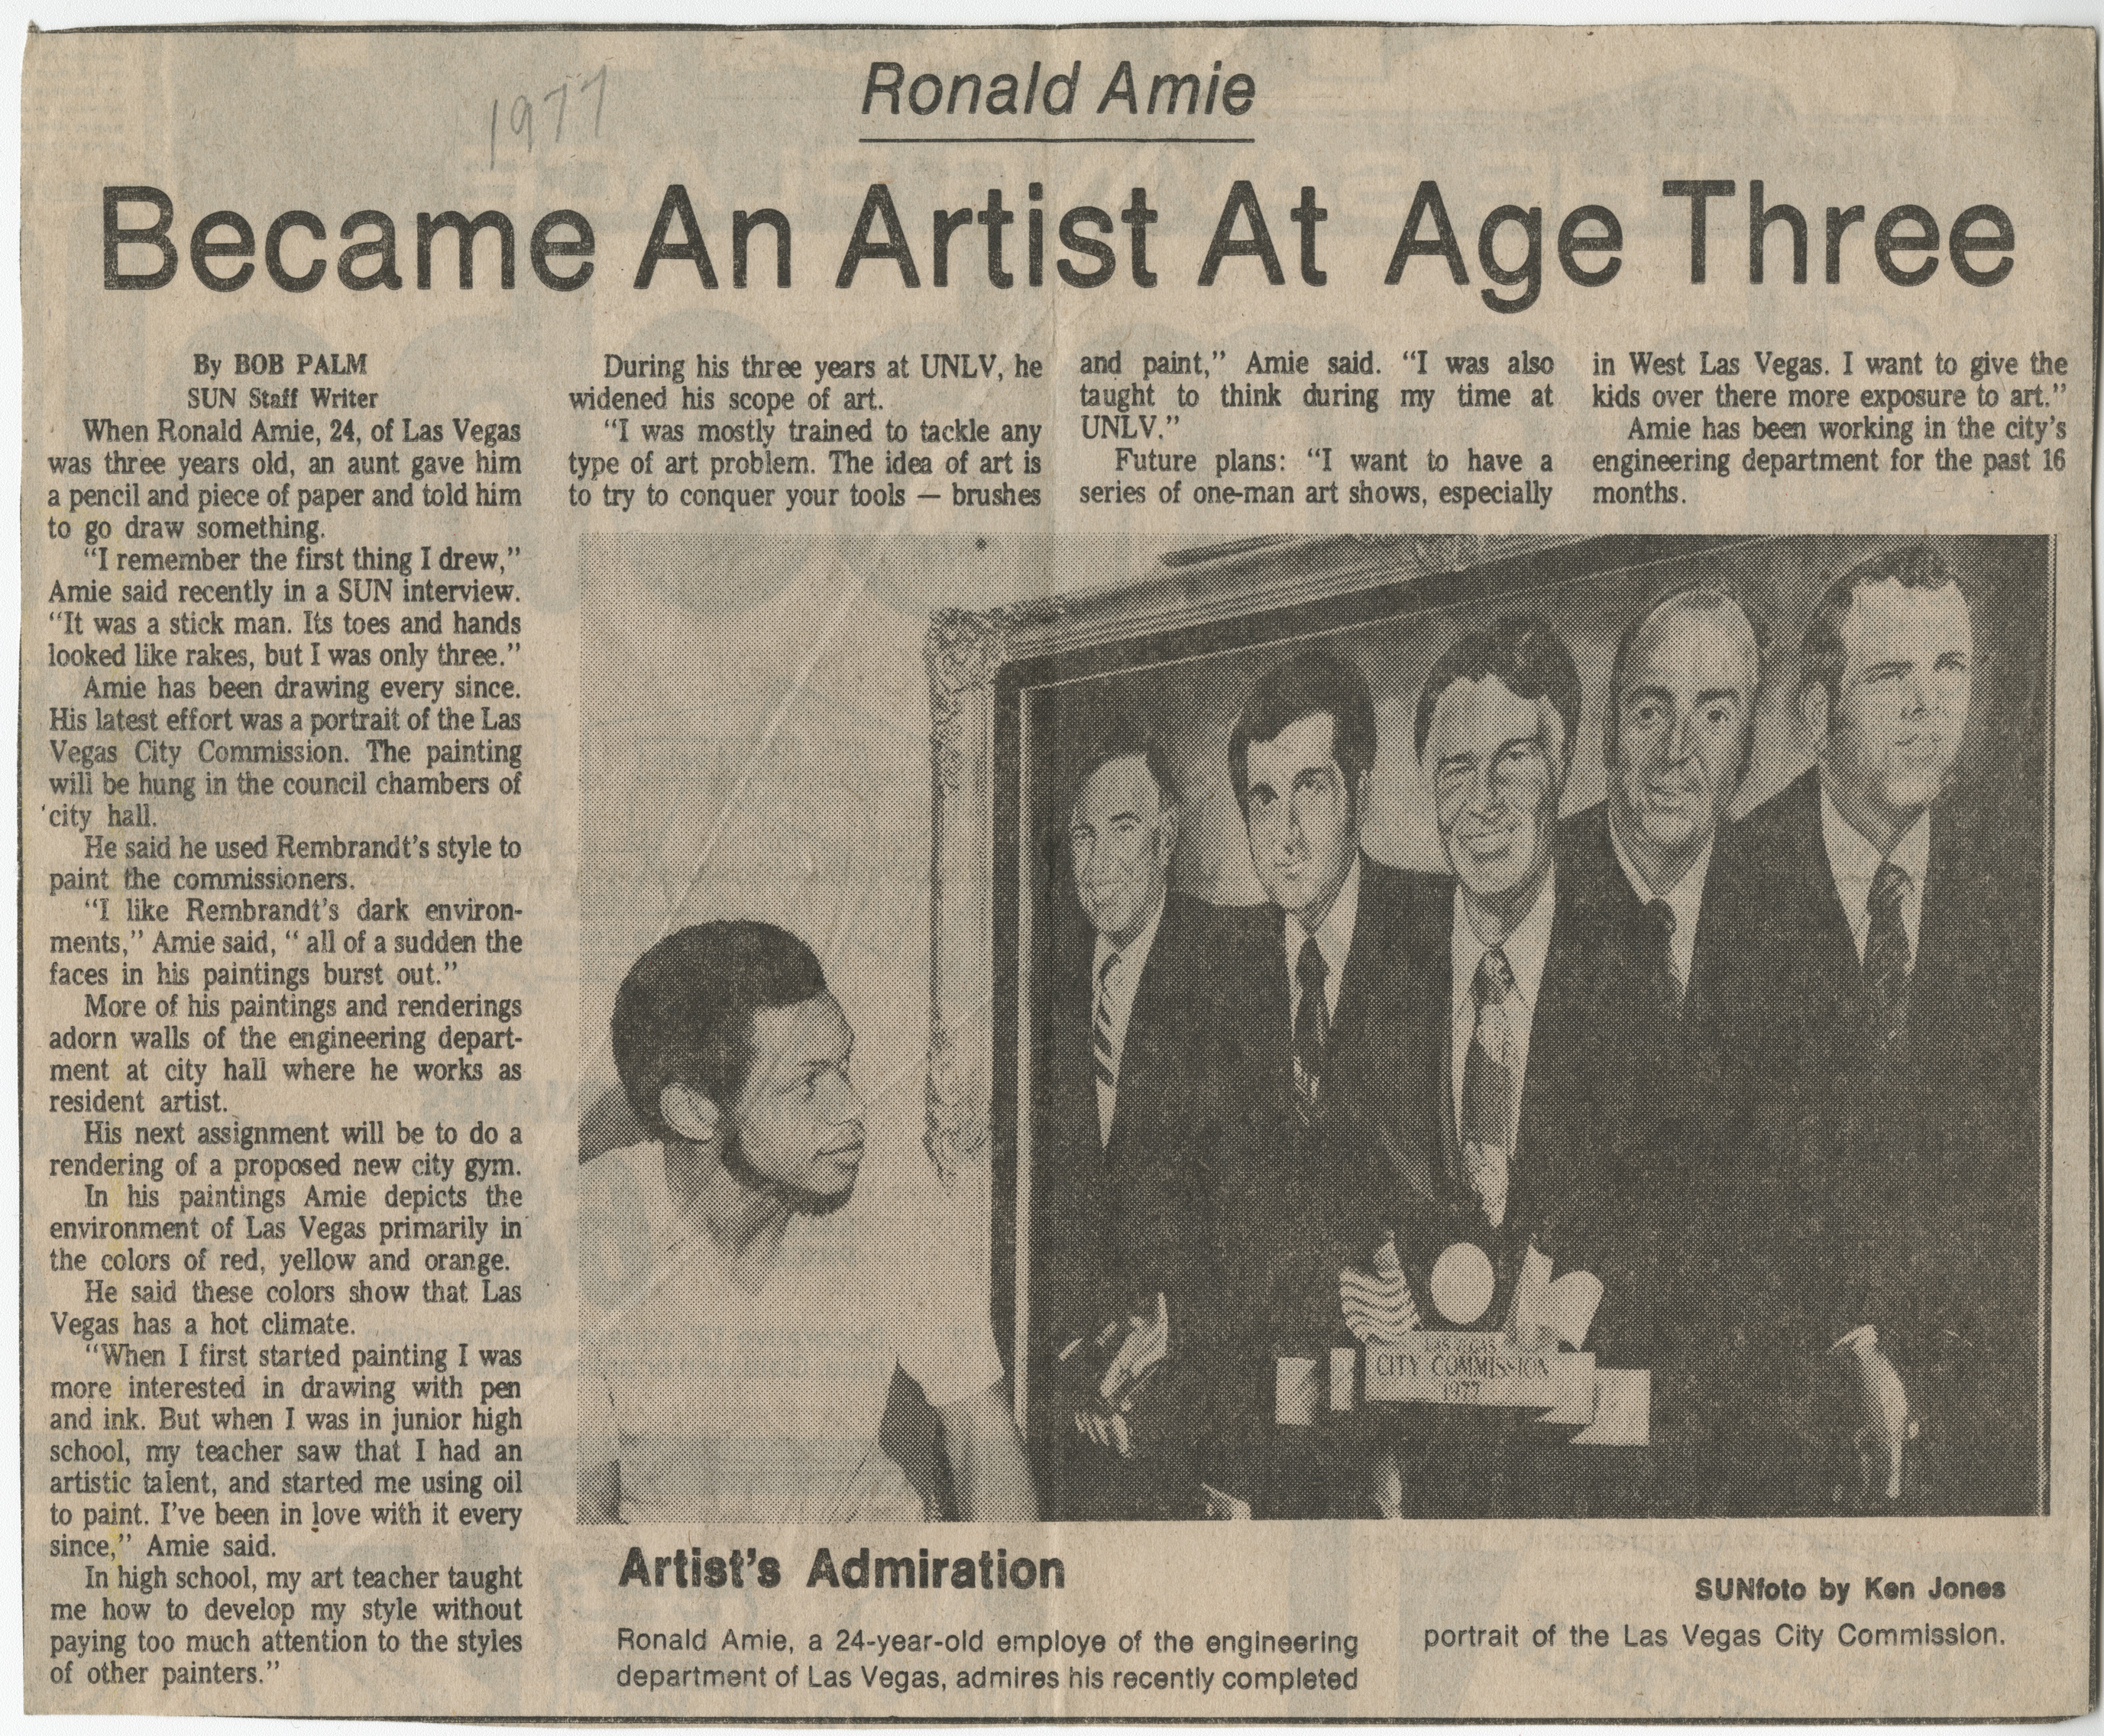 Newspaper clipping, Ronald Amie - Became Artist at Age Three, Las Vegas Sun, no date